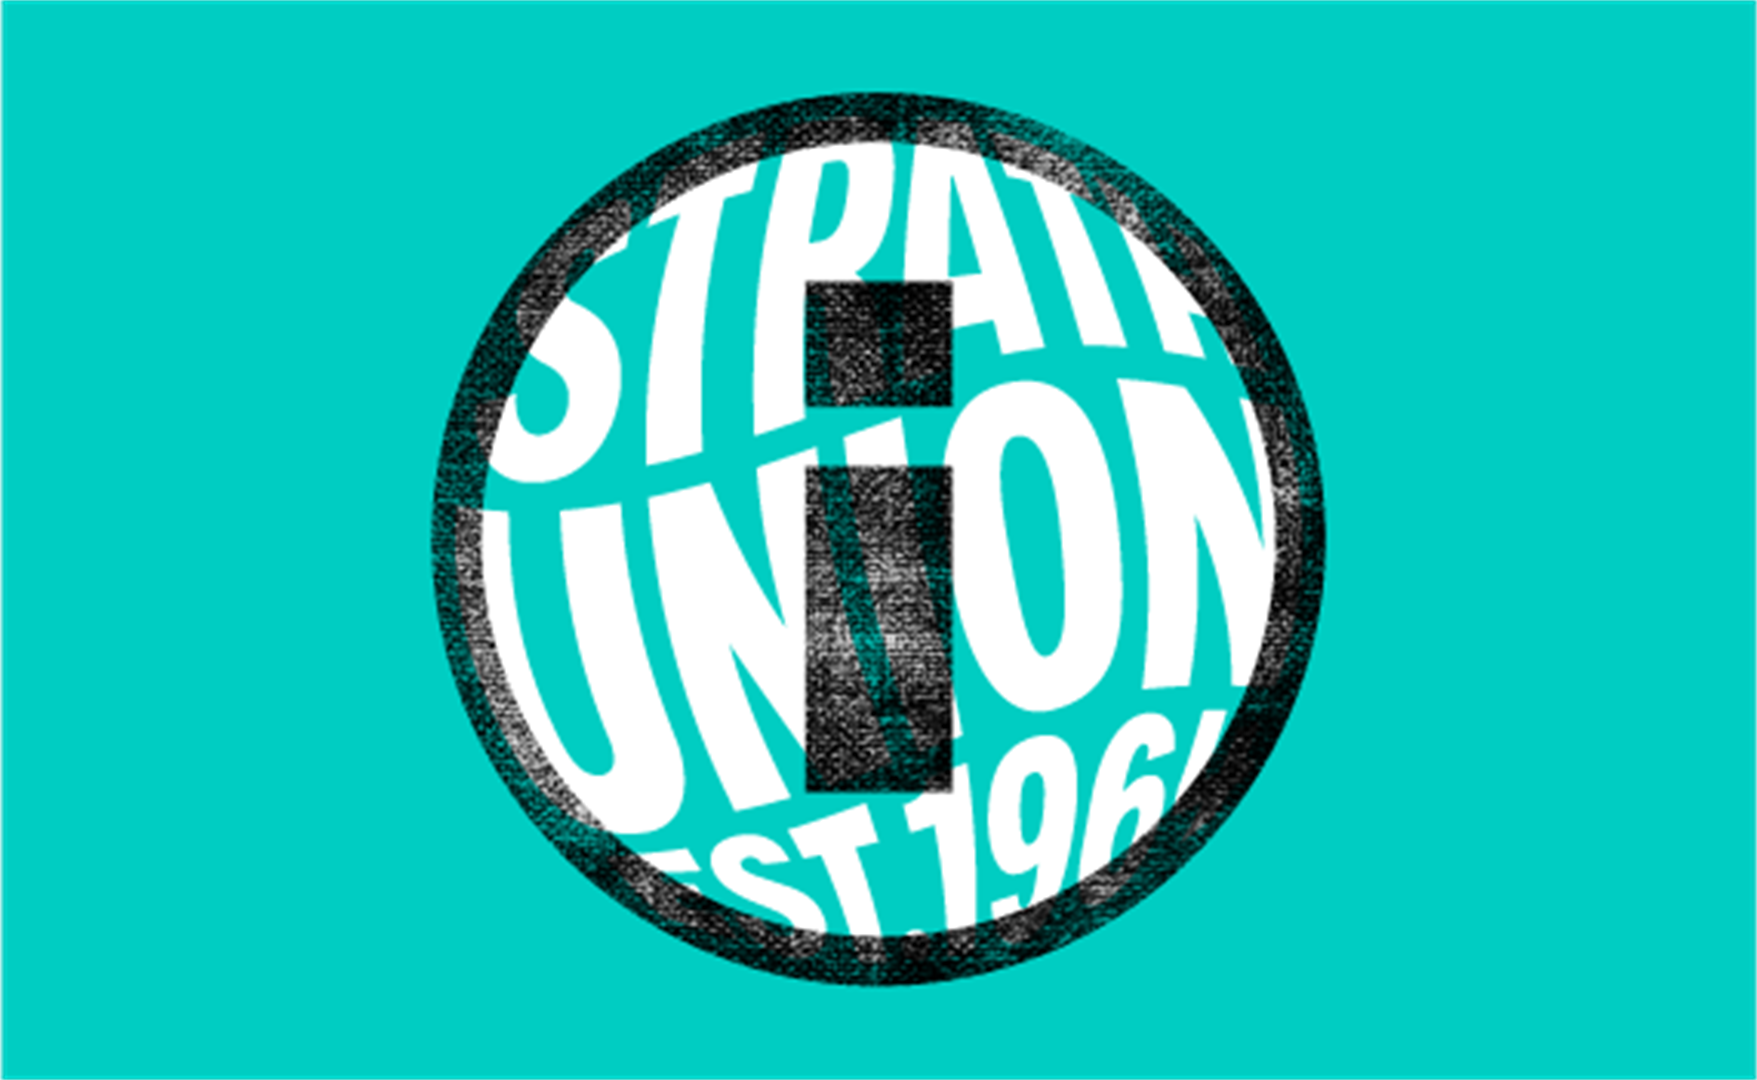 Access the Code of Conduct which sets out our expectations of all who participate within Strath Union.